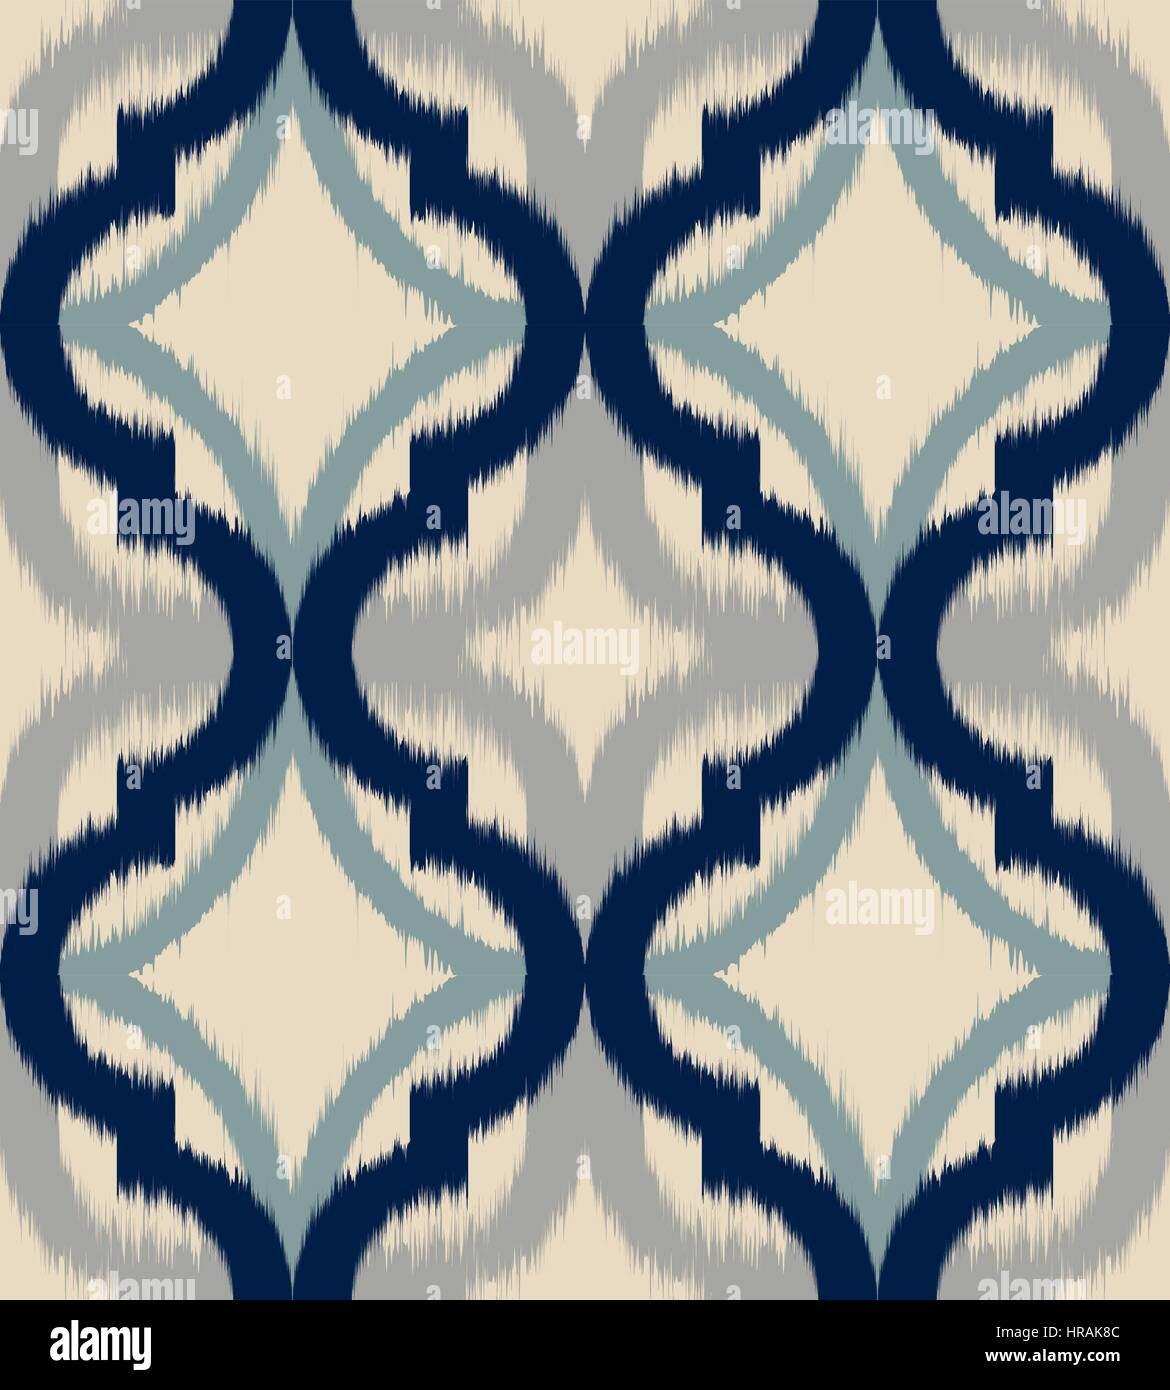 Traditional block printed ornament. Seamless floral pattern, handmade Russian folk motif with clover and blocks in navy blue and ecru. Textile print. Stock Vector